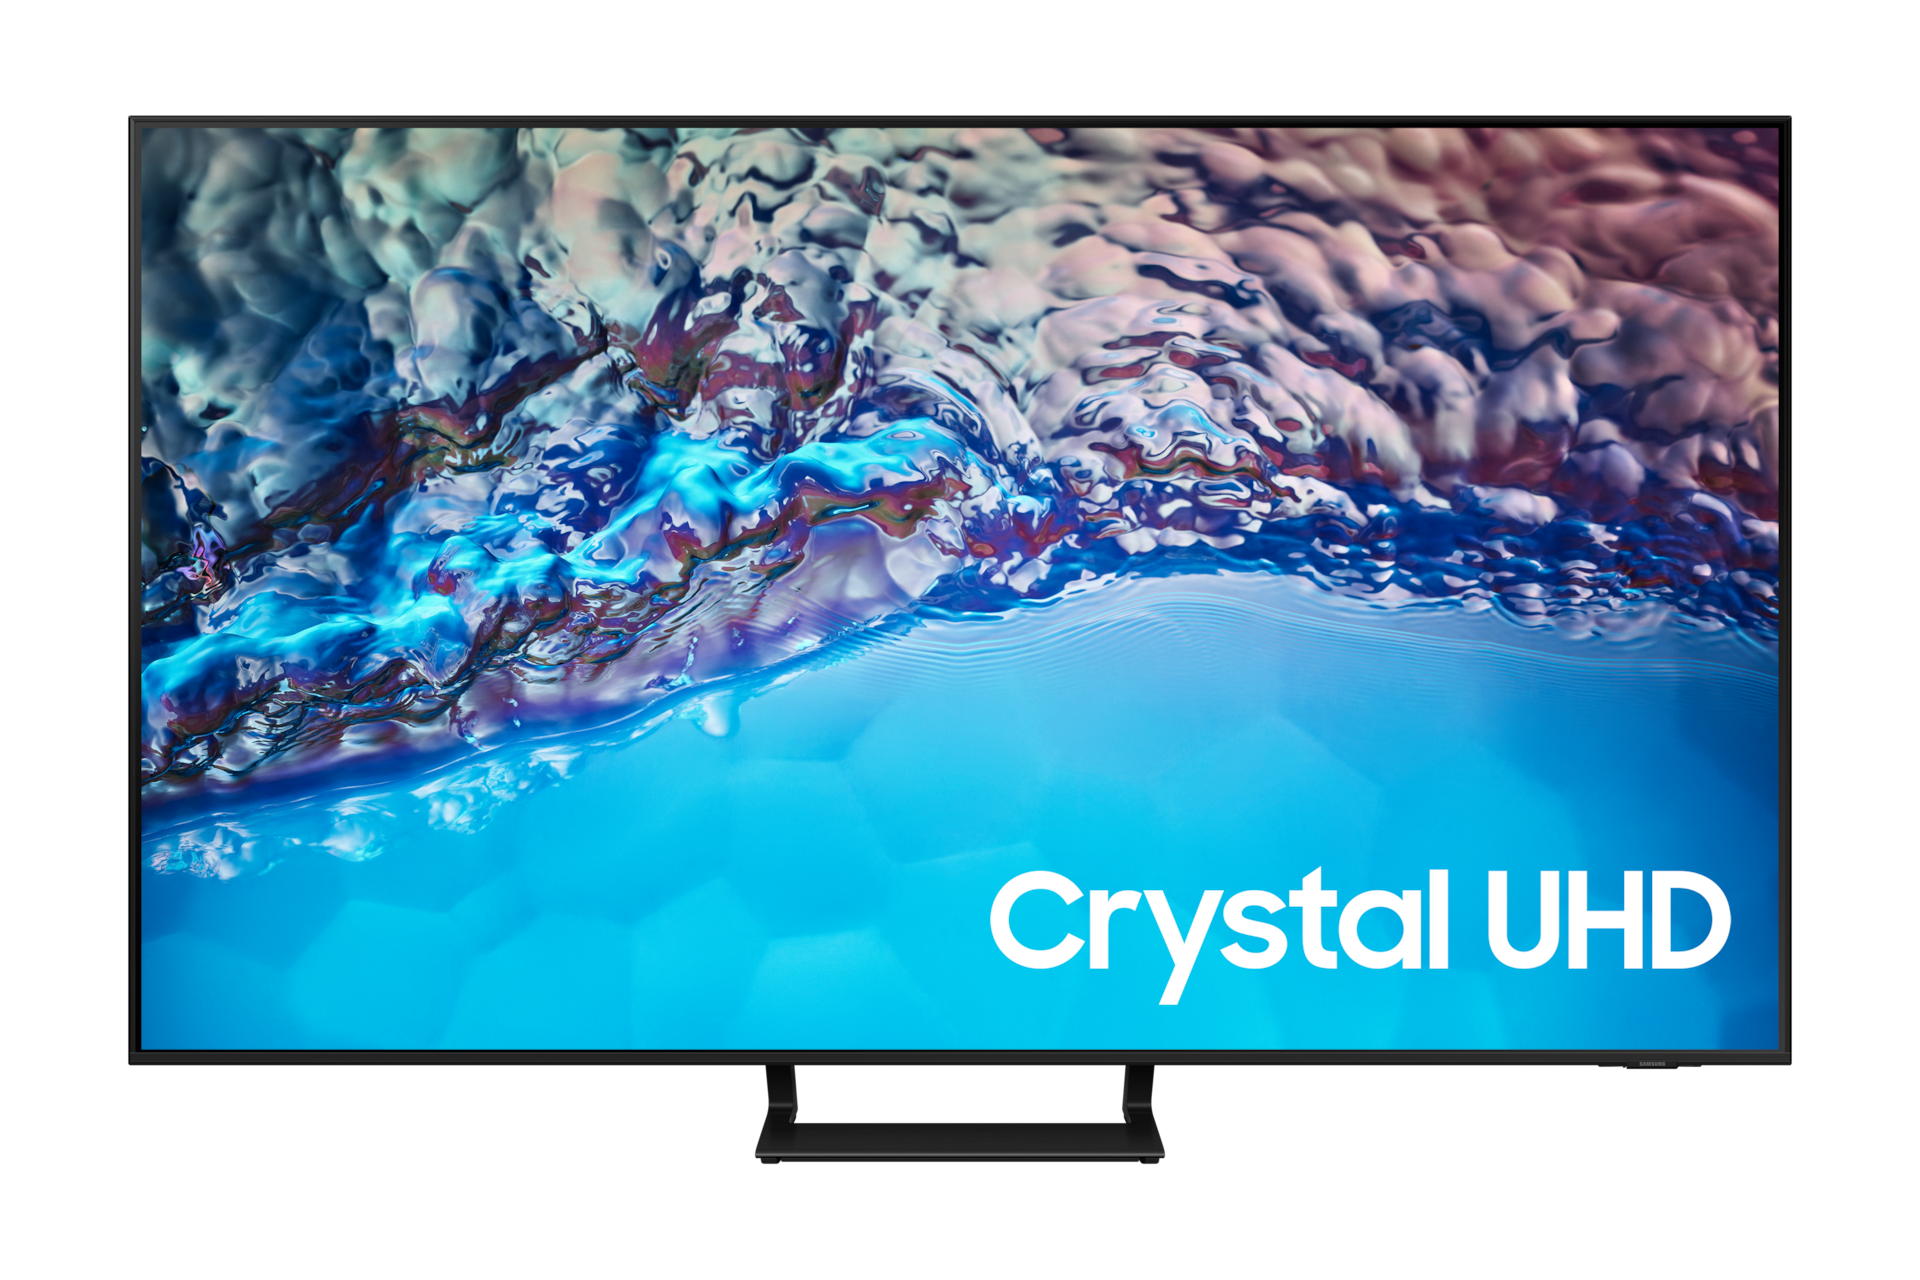 Samsung Crystal 4K UHD BU8500 is powered by Tizen with features such as screen mirroring, WiFi Direct, SmartThings, Smart Hub, and Voice Assistant. Check out the price and buy now.